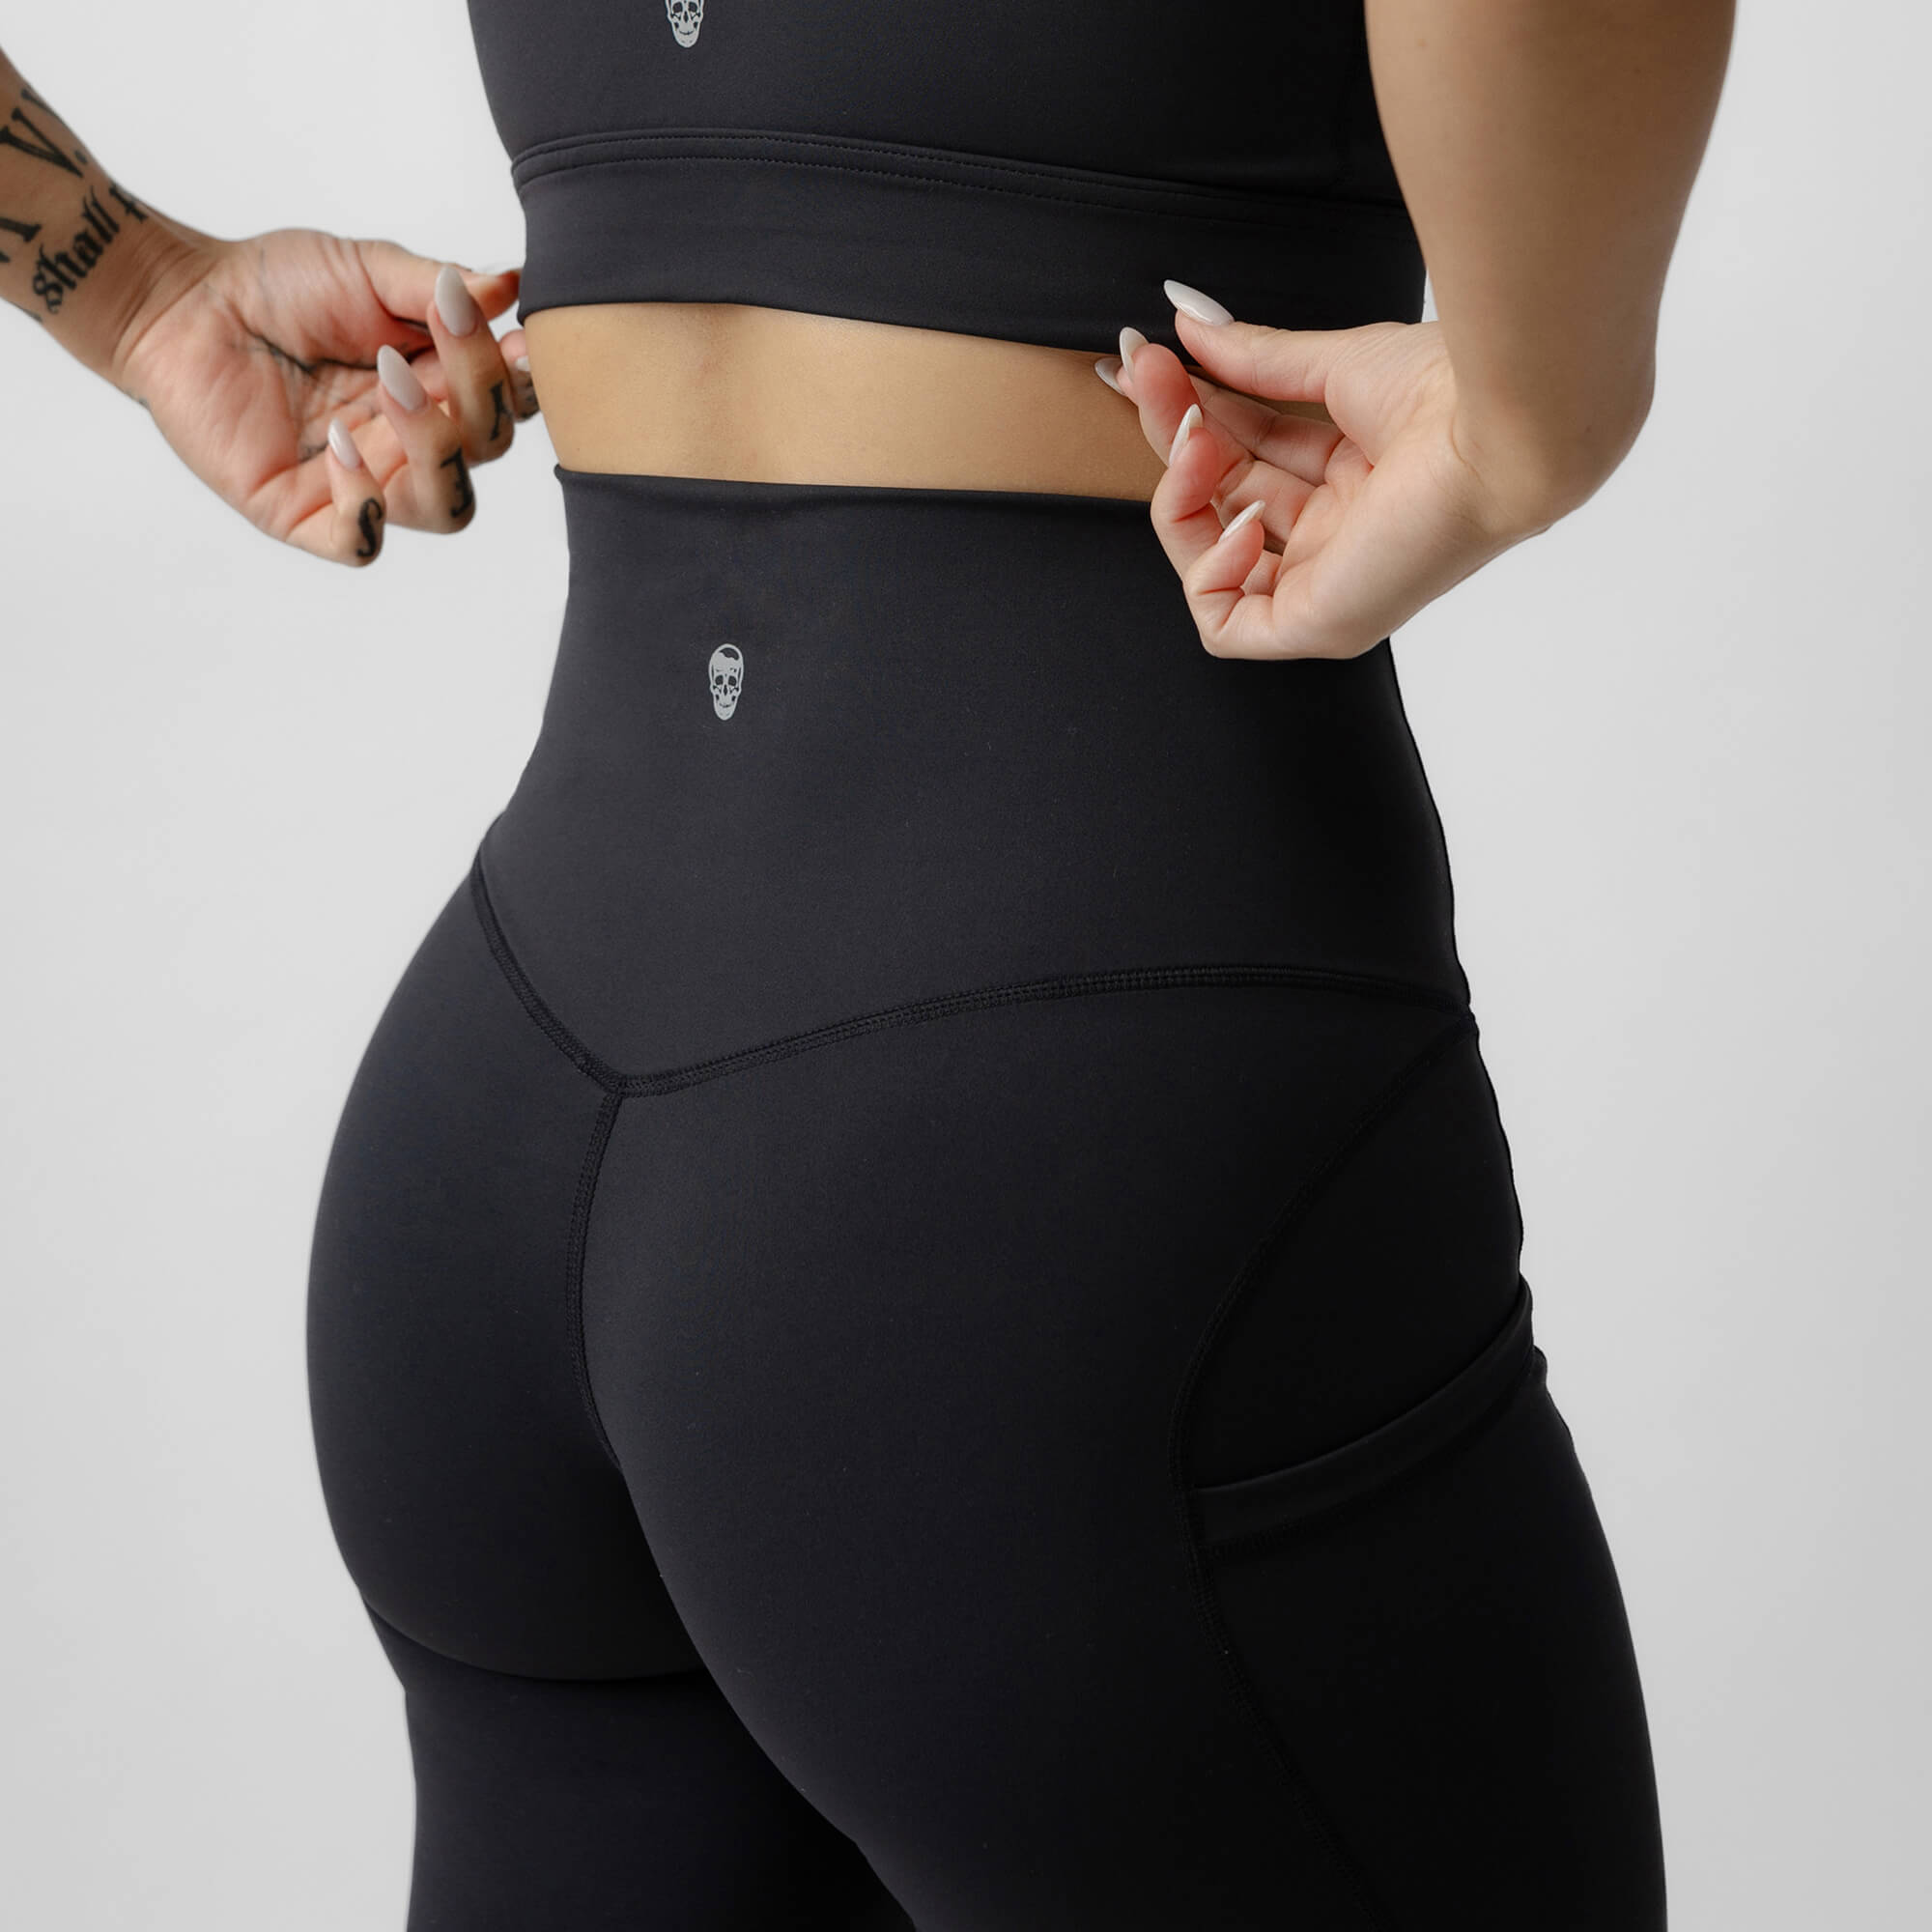 The “Bootay” Black leggings – Glam Fit Apparel